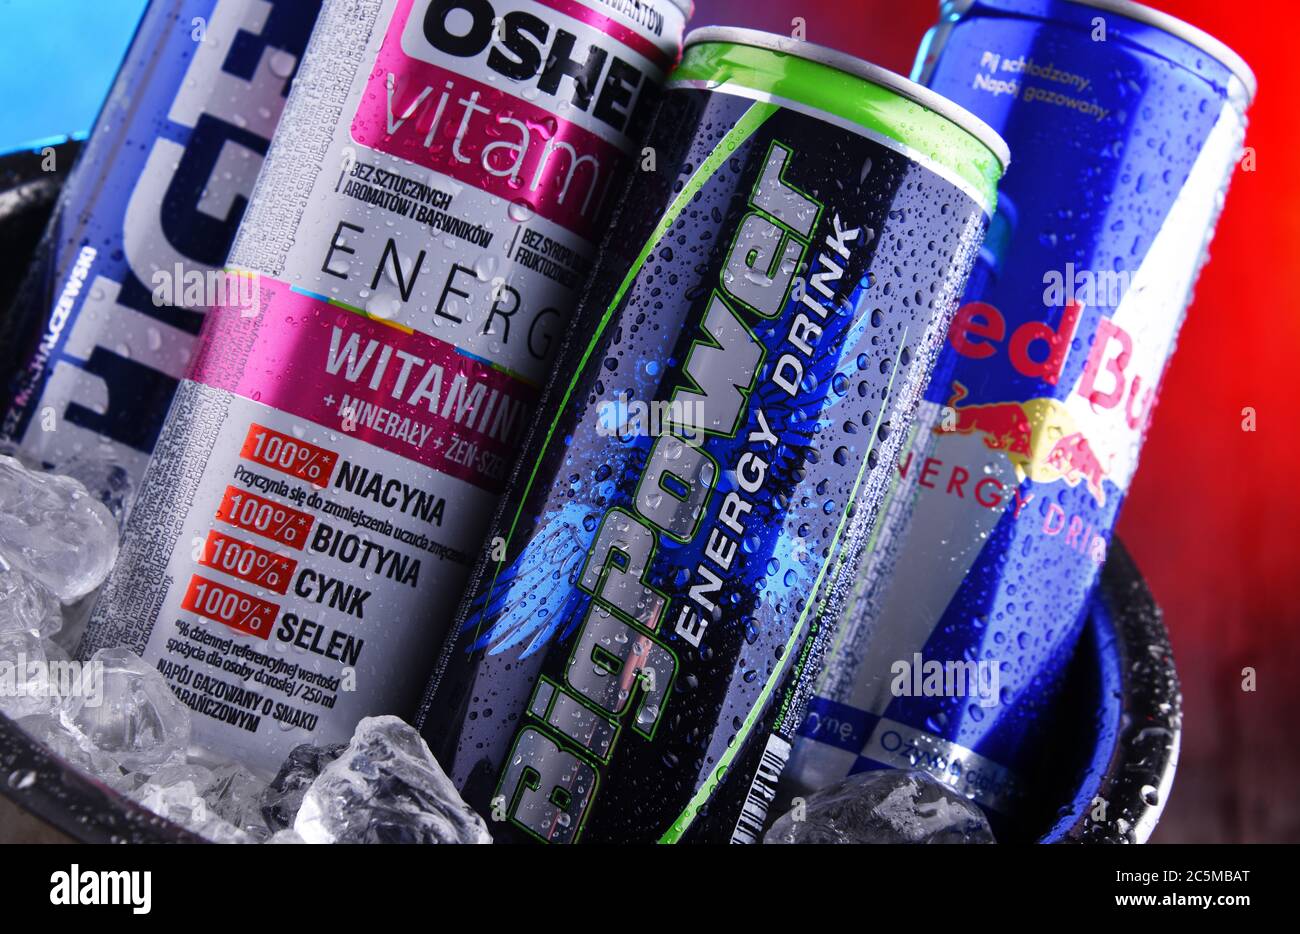 POZNAN, POLAND - JAN 29, 2020: Cans of popular global energy drinks, beverages containing stimulant drugs and marketed as providing mental and physica Stock Photo